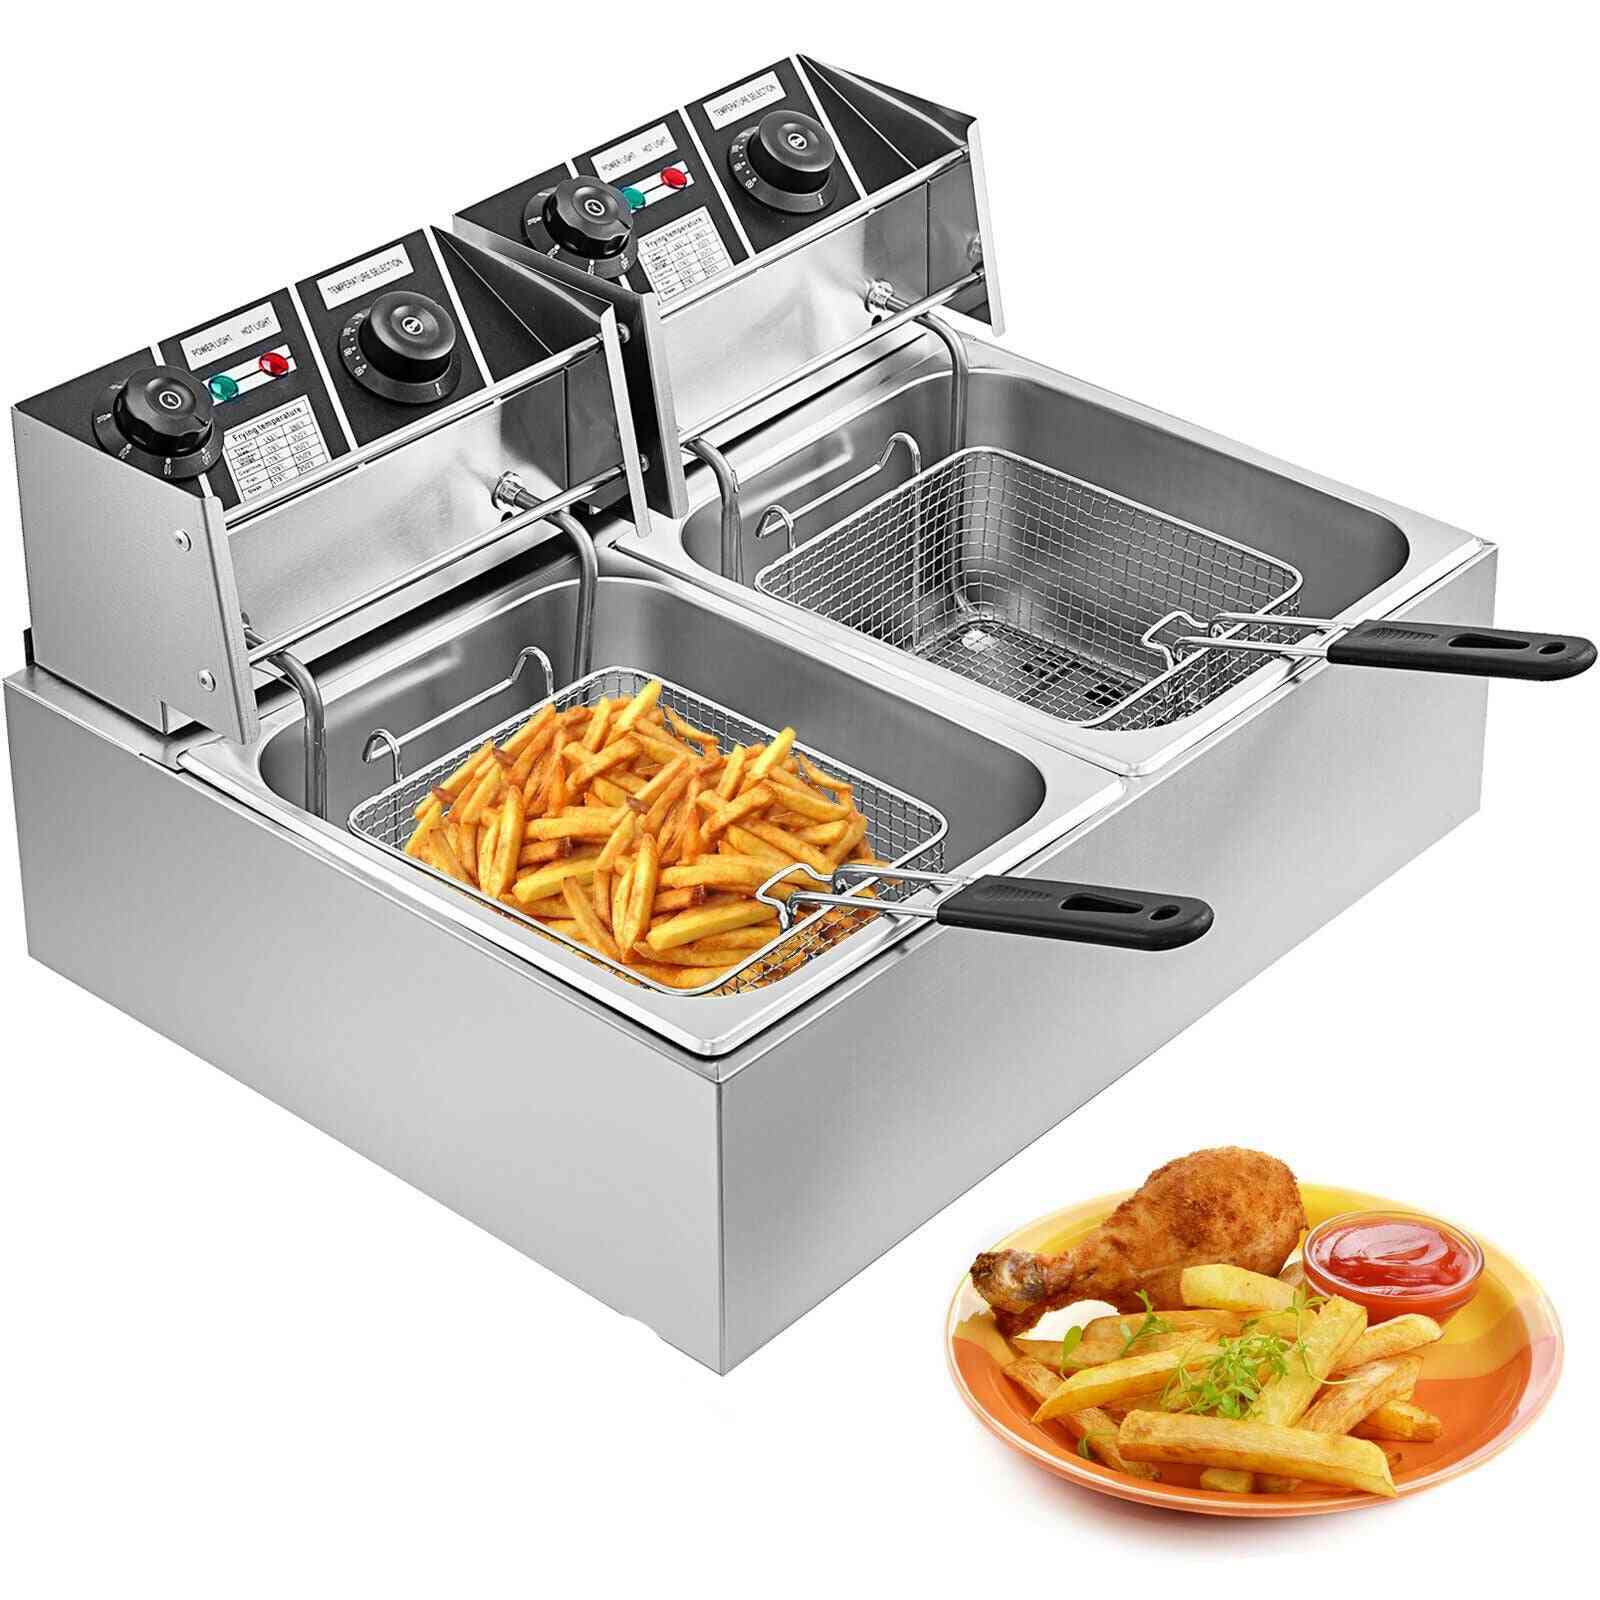 Electric Stainless Steel, Double Tank Fryer With Basket